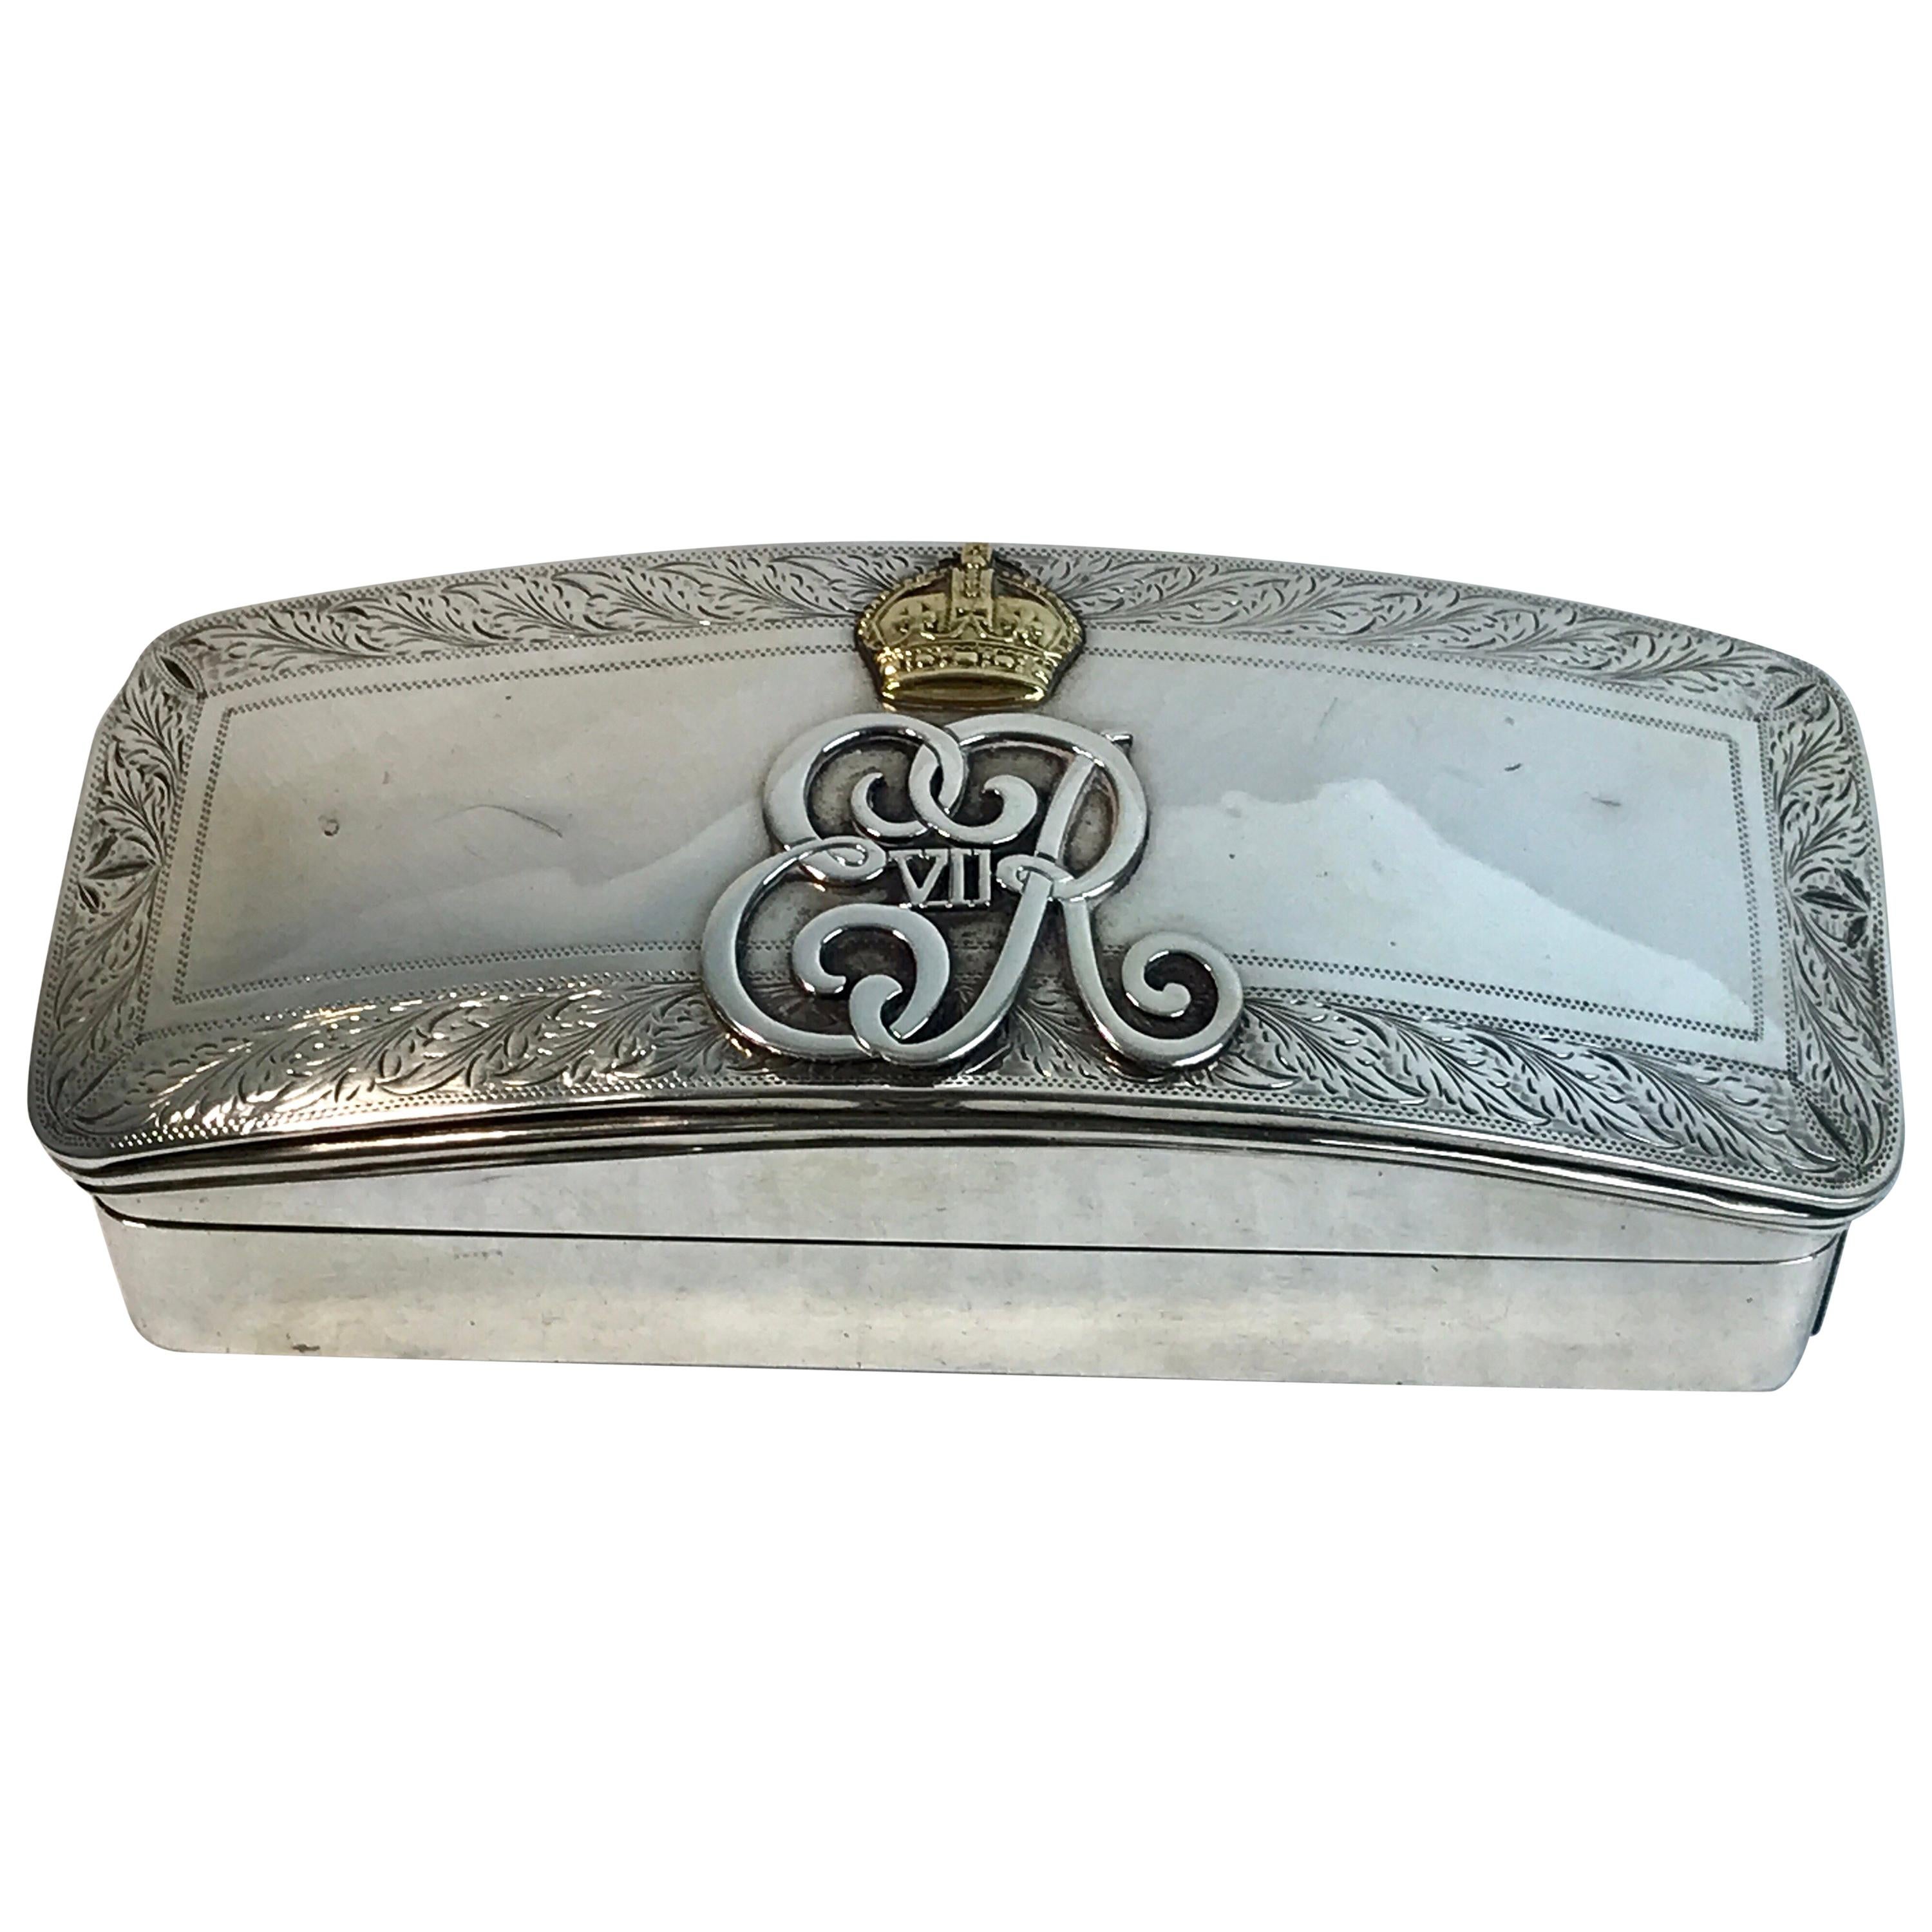 English Sterling and Gold Smoking Box with Cypher of King Edward VII